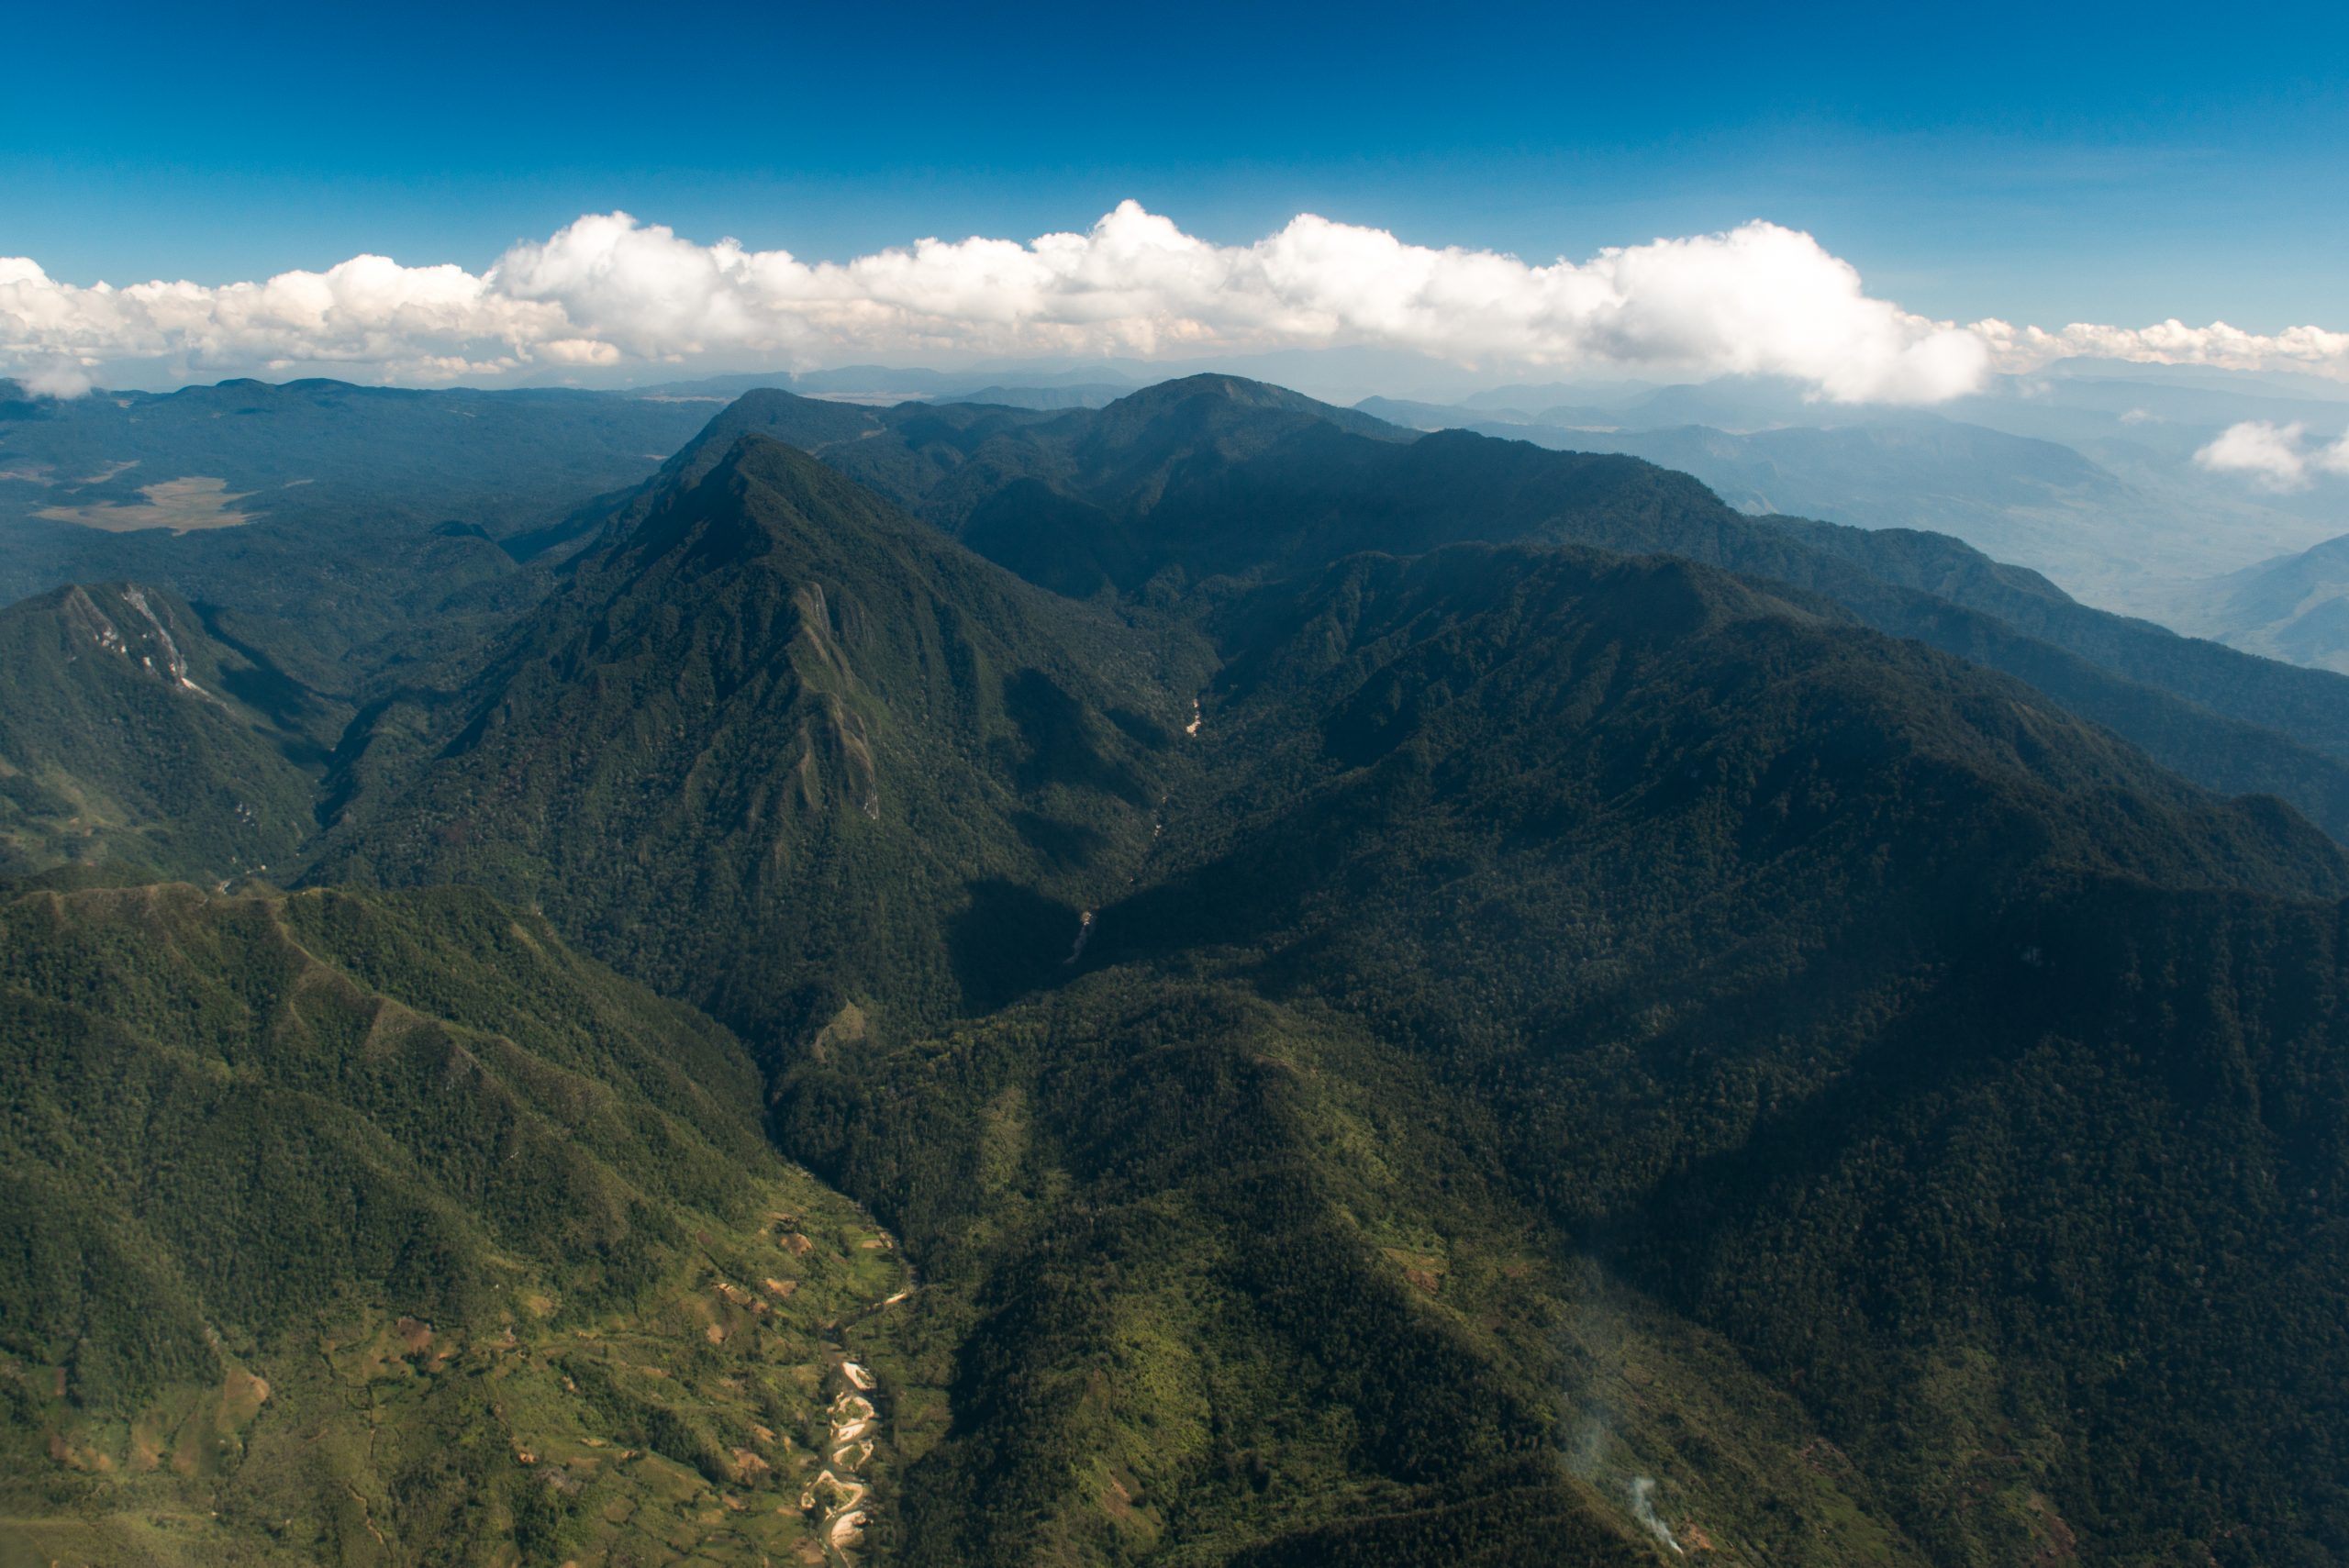 My first glimpse of Papua New Guinea’s rugged Central Highlands.